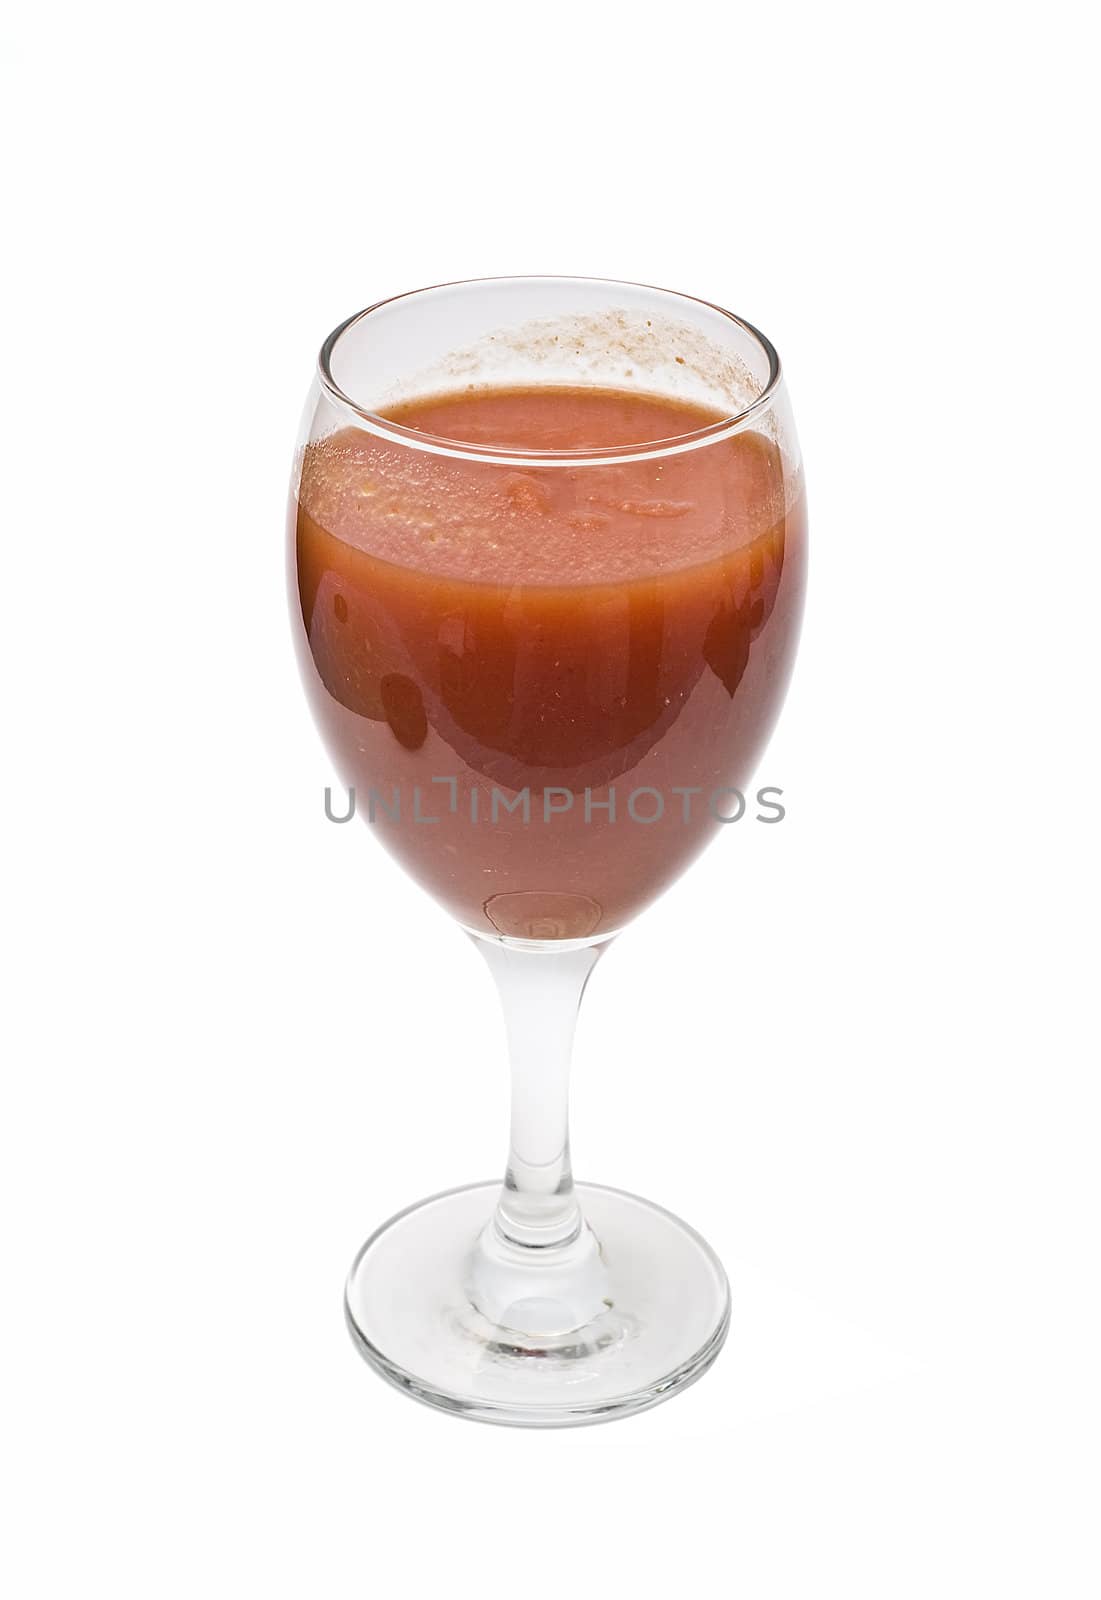 A cup of tomato juice on a white background.